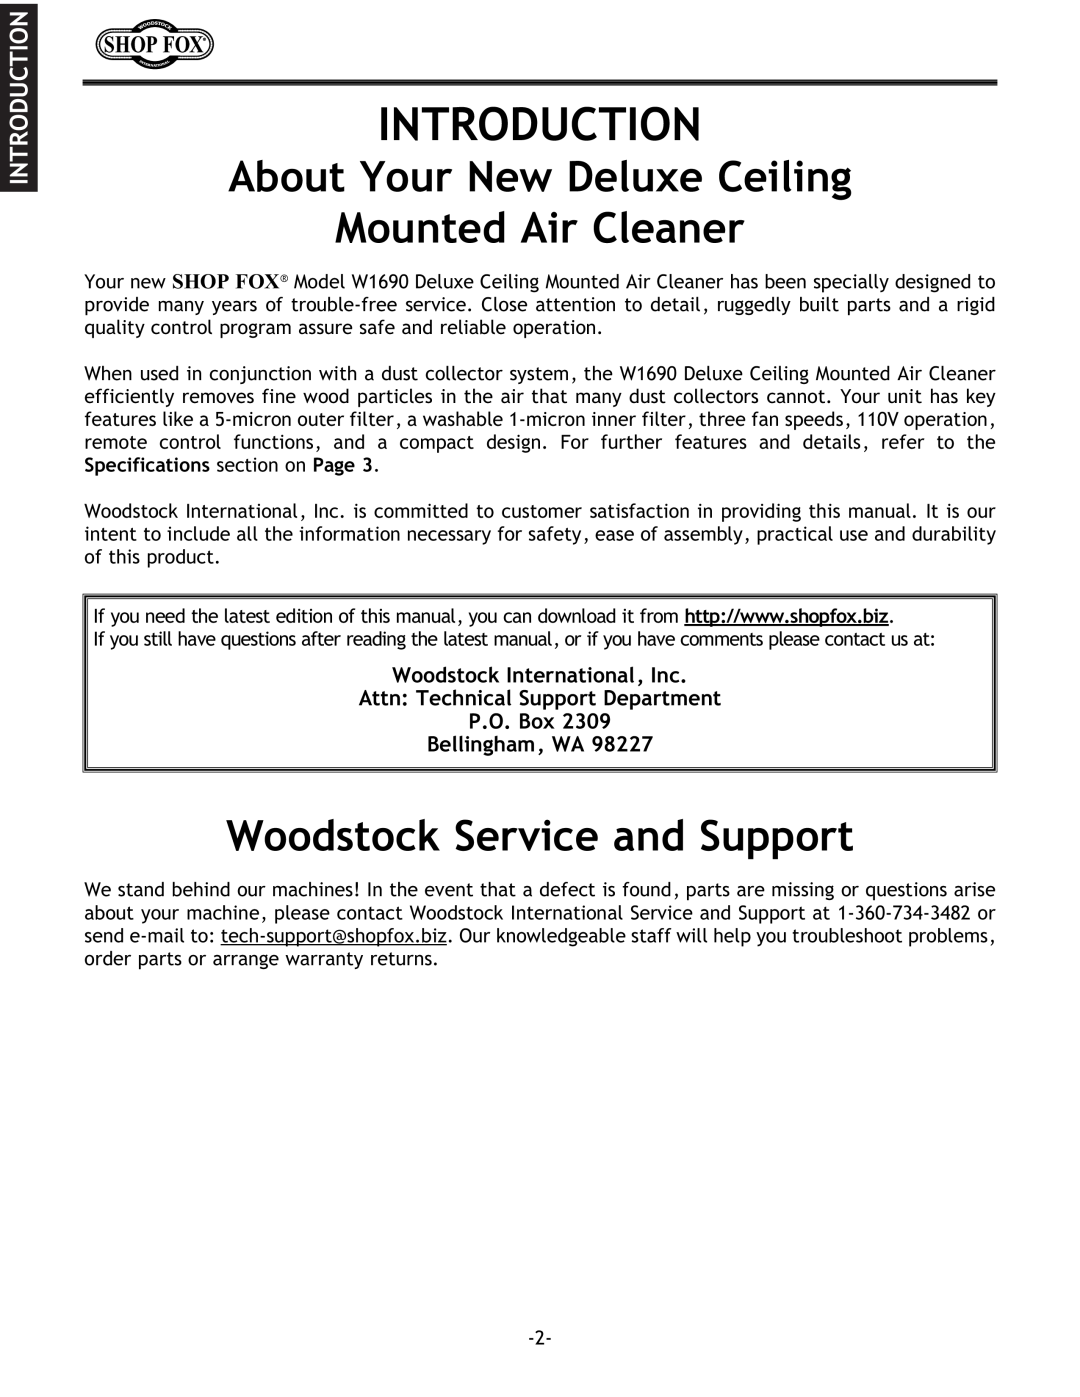 Woodstock W1690 Introduction, About Your New Deluxe Ceiling Mounted Air Cleaner, Woodstock Service and Support 